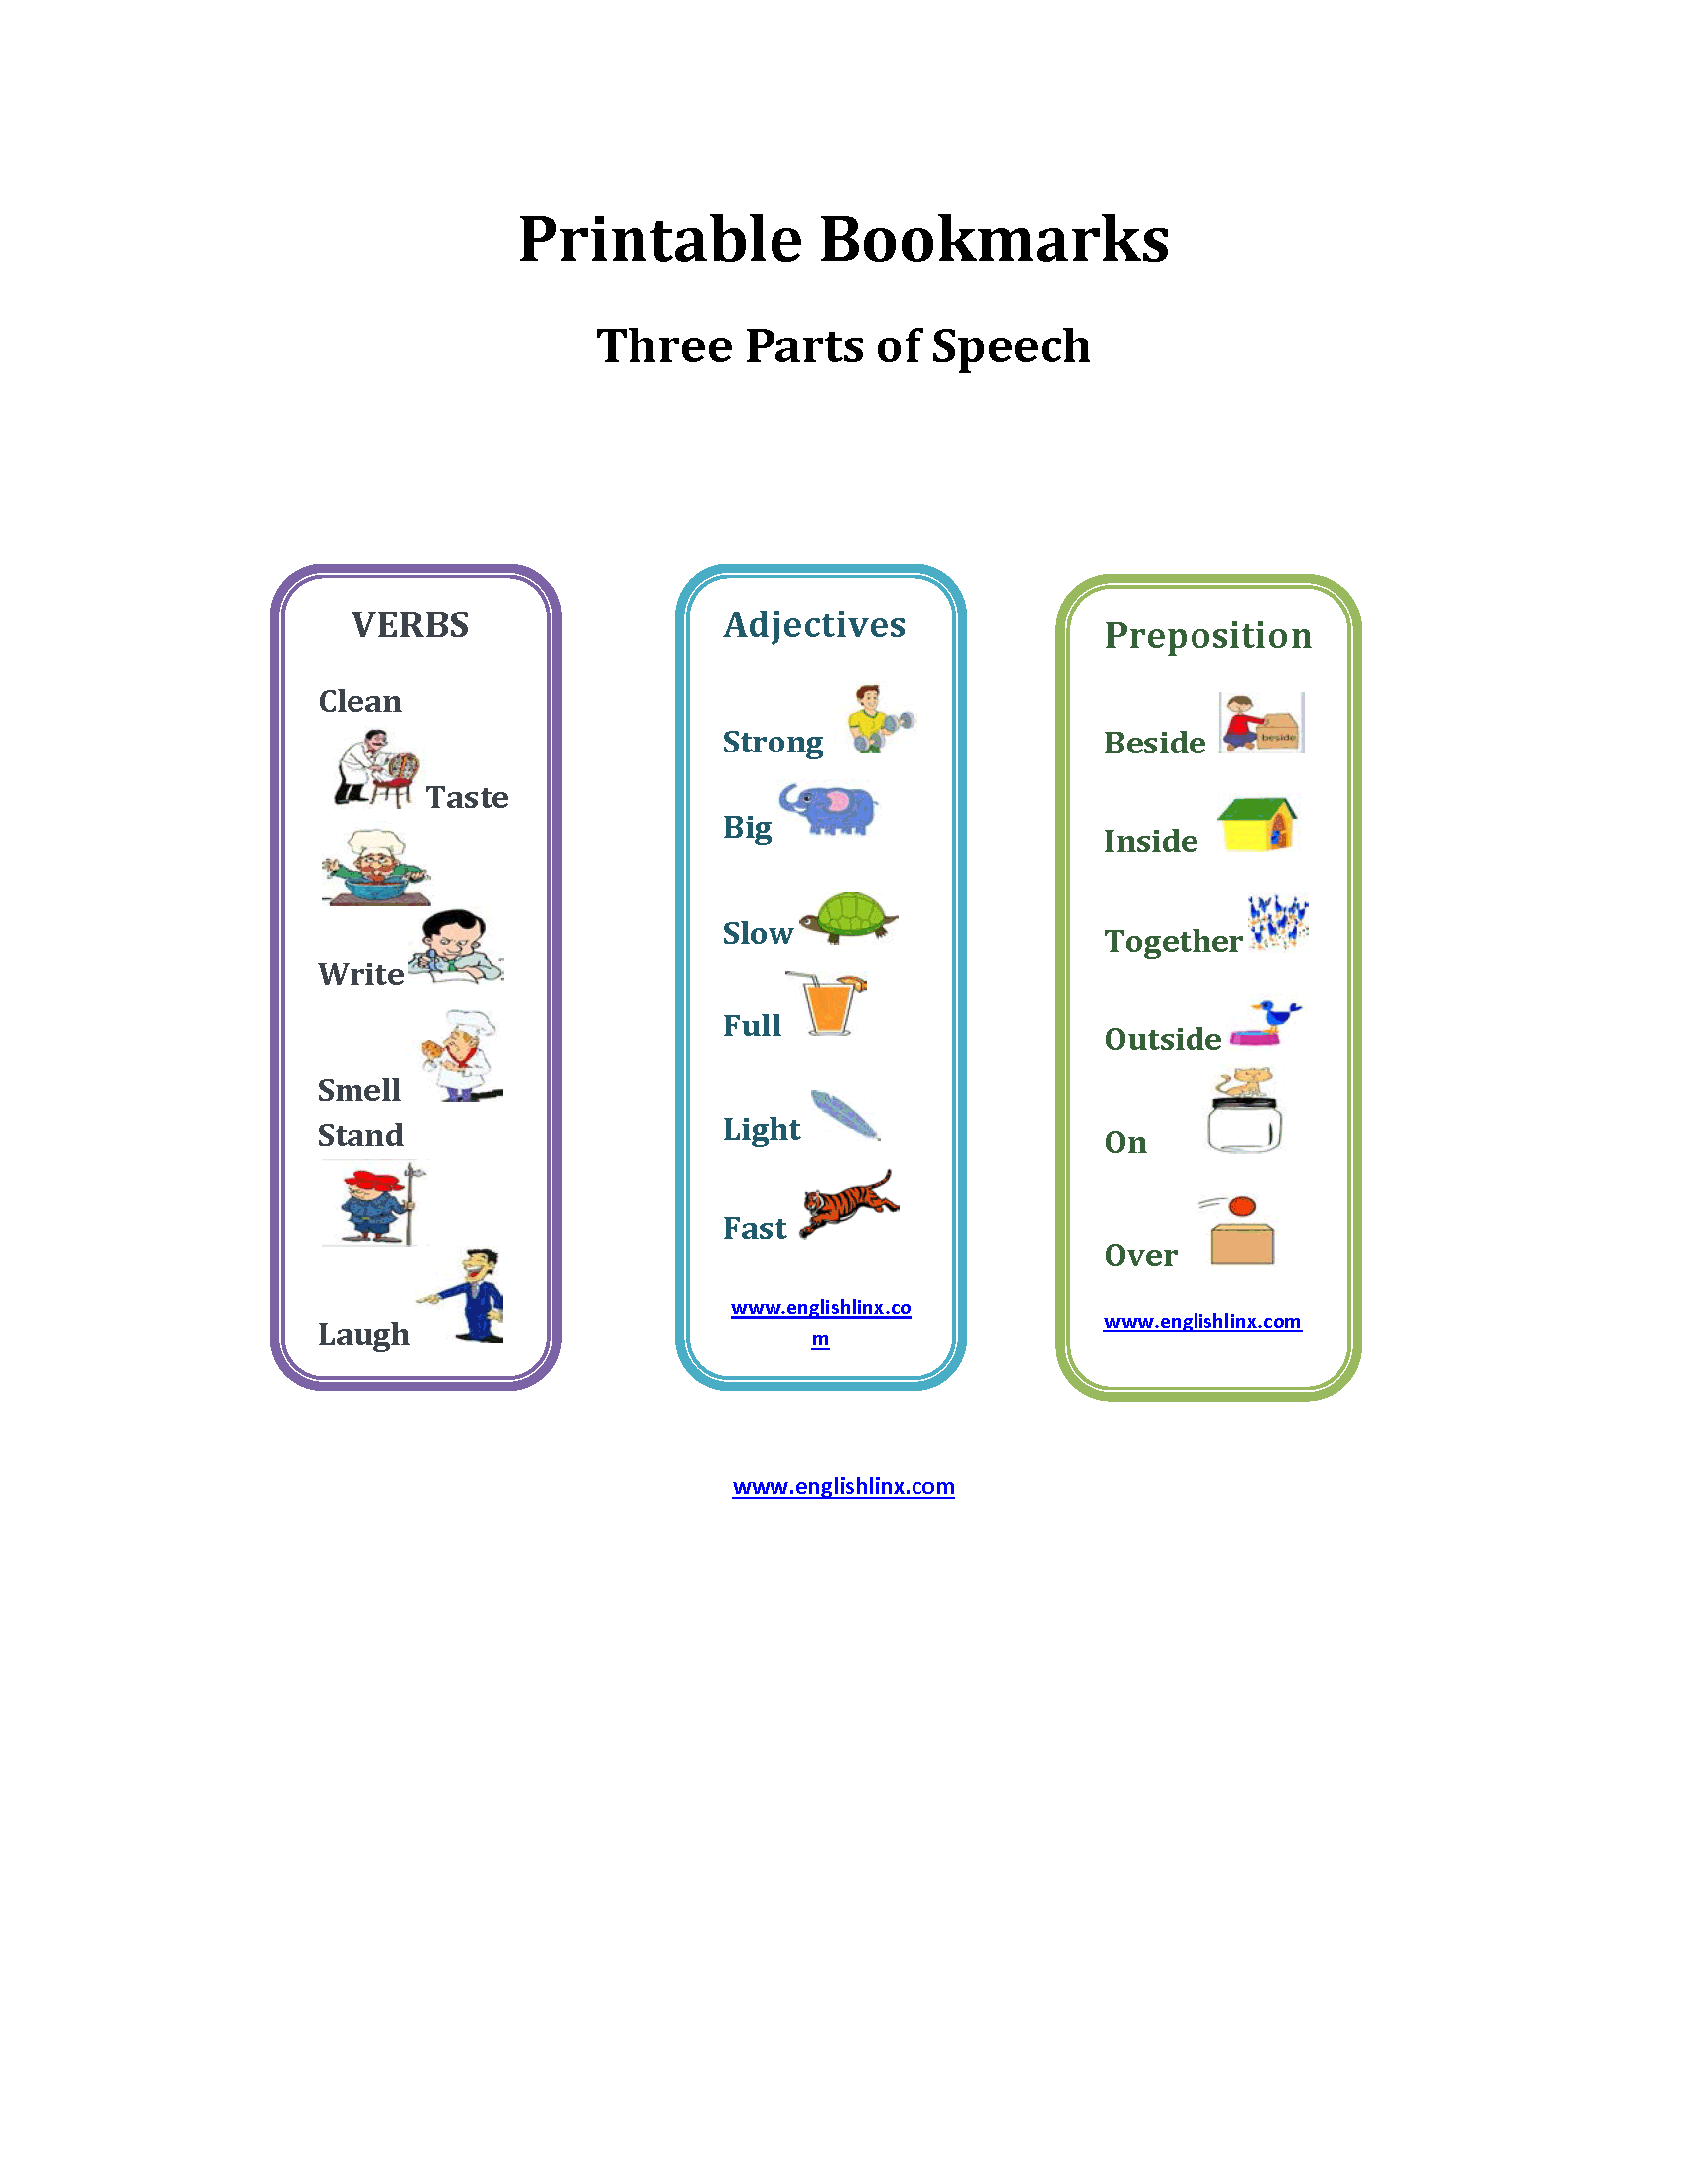 Parts of Speech Printable Bookmarks Worksheets